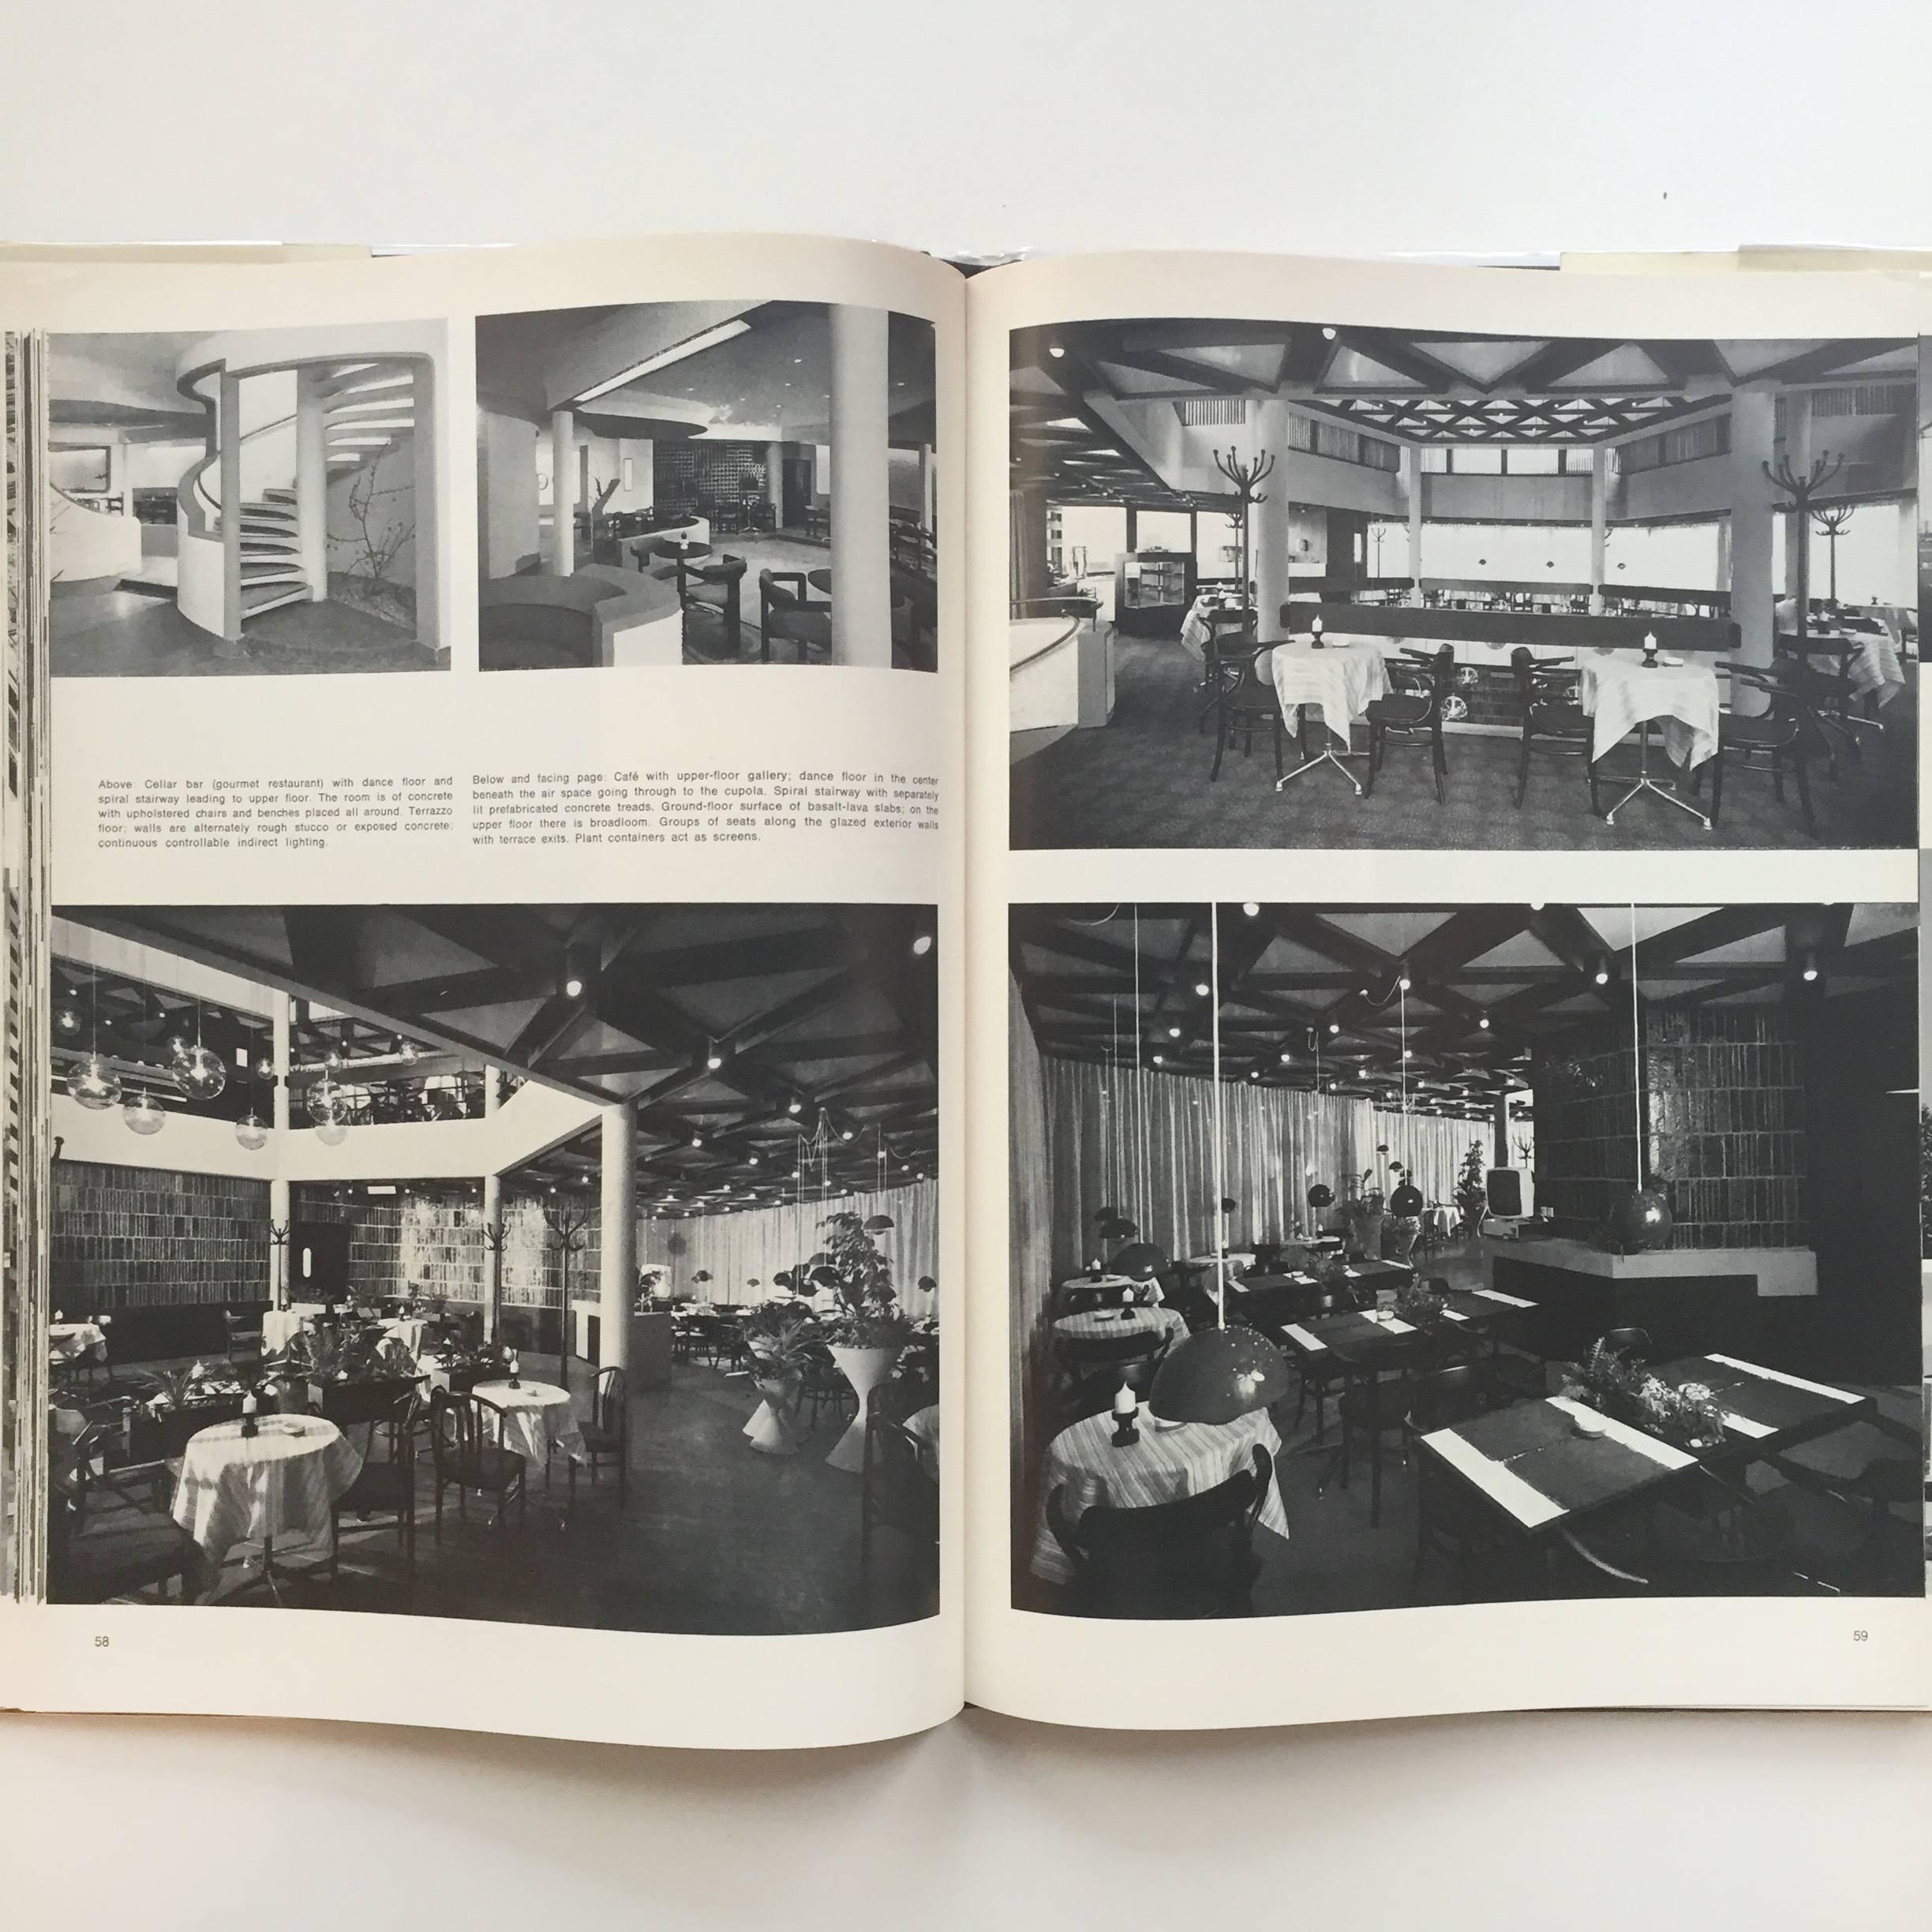 Restaurant Architecture and Design by Max Fengler, 1971 2